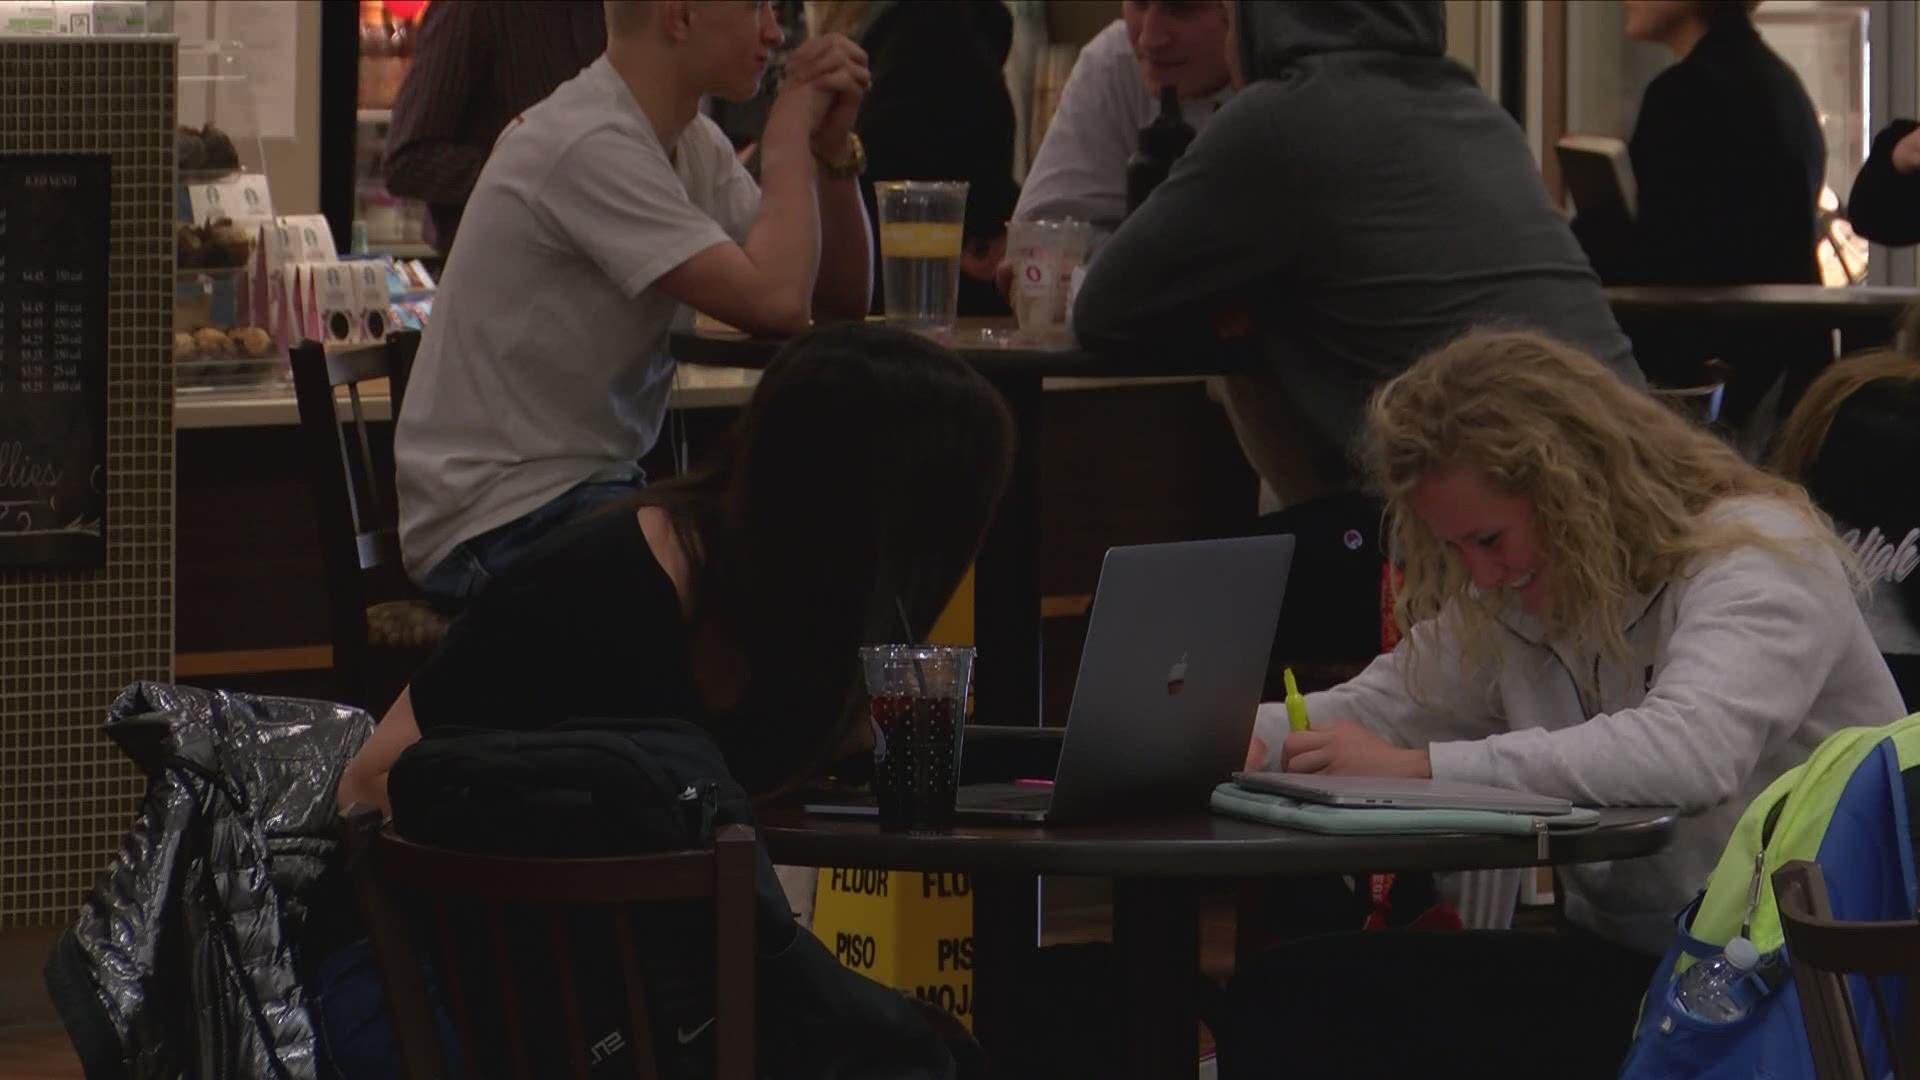 Simpson College Reminding Students To Stay Safe While Studying